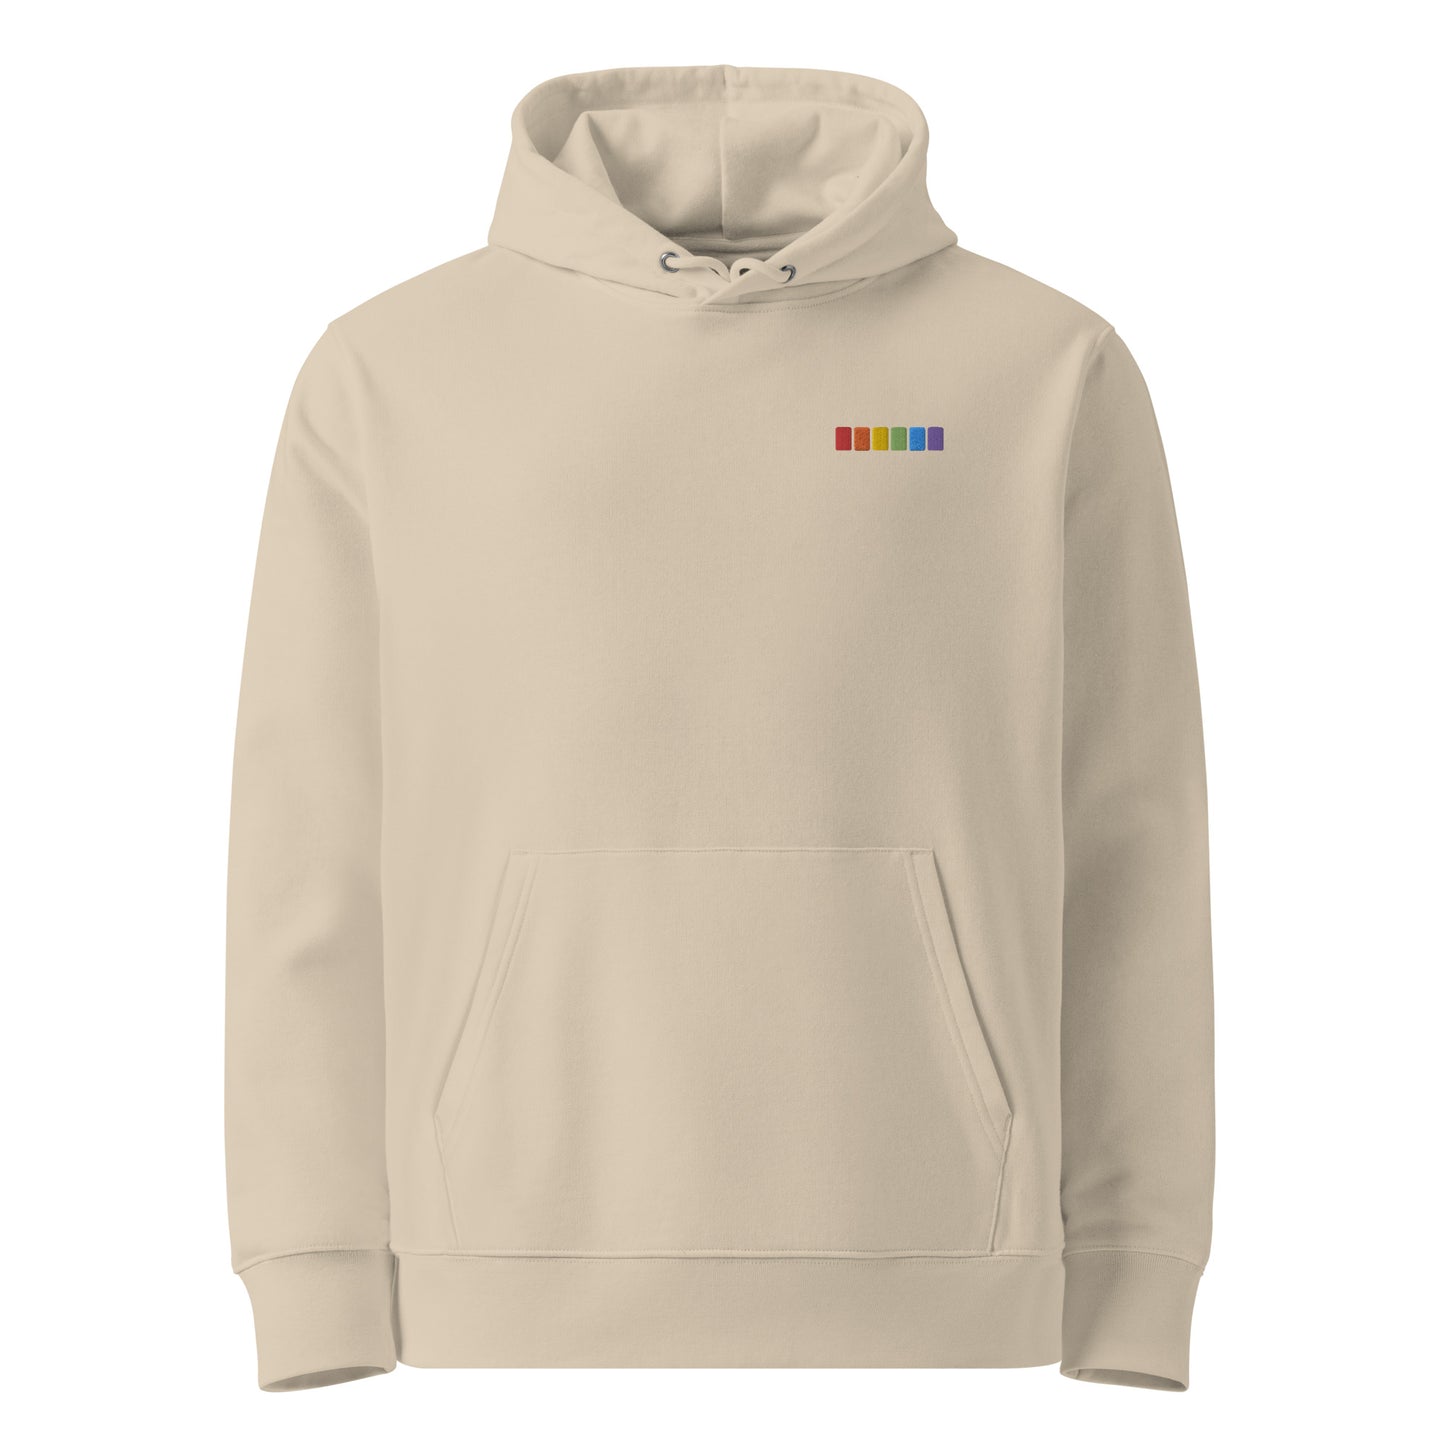 Unisex eco-friendly desert dust hoodie featuring on the upper left chest rainbow squares embroidery, adding a touch of lgbtq to your outfit. sizes: small, medium, large, extra large, double extra large.